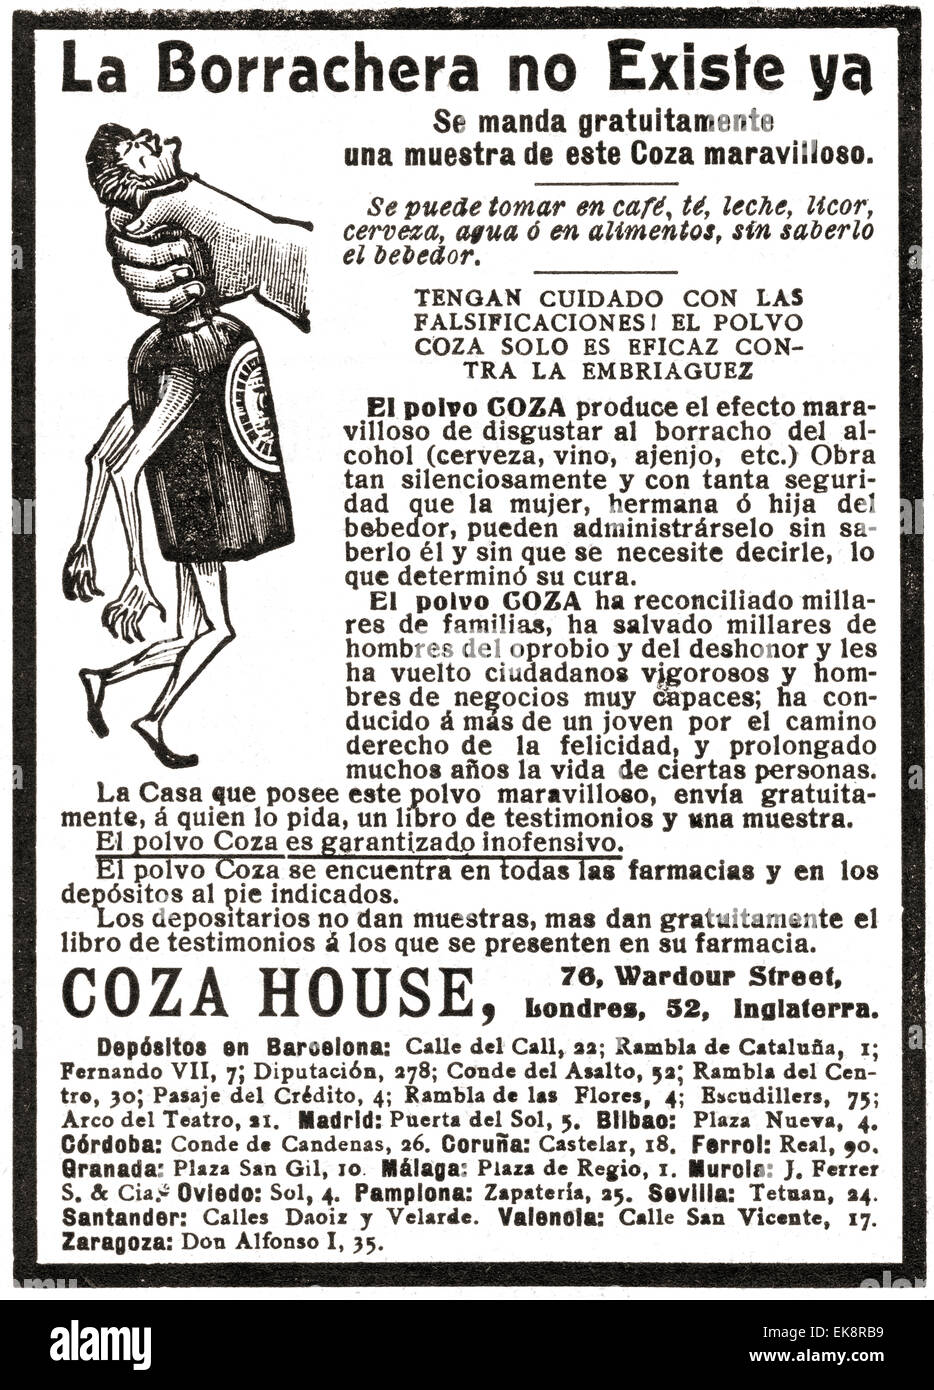 La Borrachera no existe ya.  Drunkenness is finished.  Spanish advertisement for Polvos Coza or Coza Powders.  A marvellous powder which apparently produced repugnance to all kinds of alcoholic drinks and cured alcoholism. Stock Photo